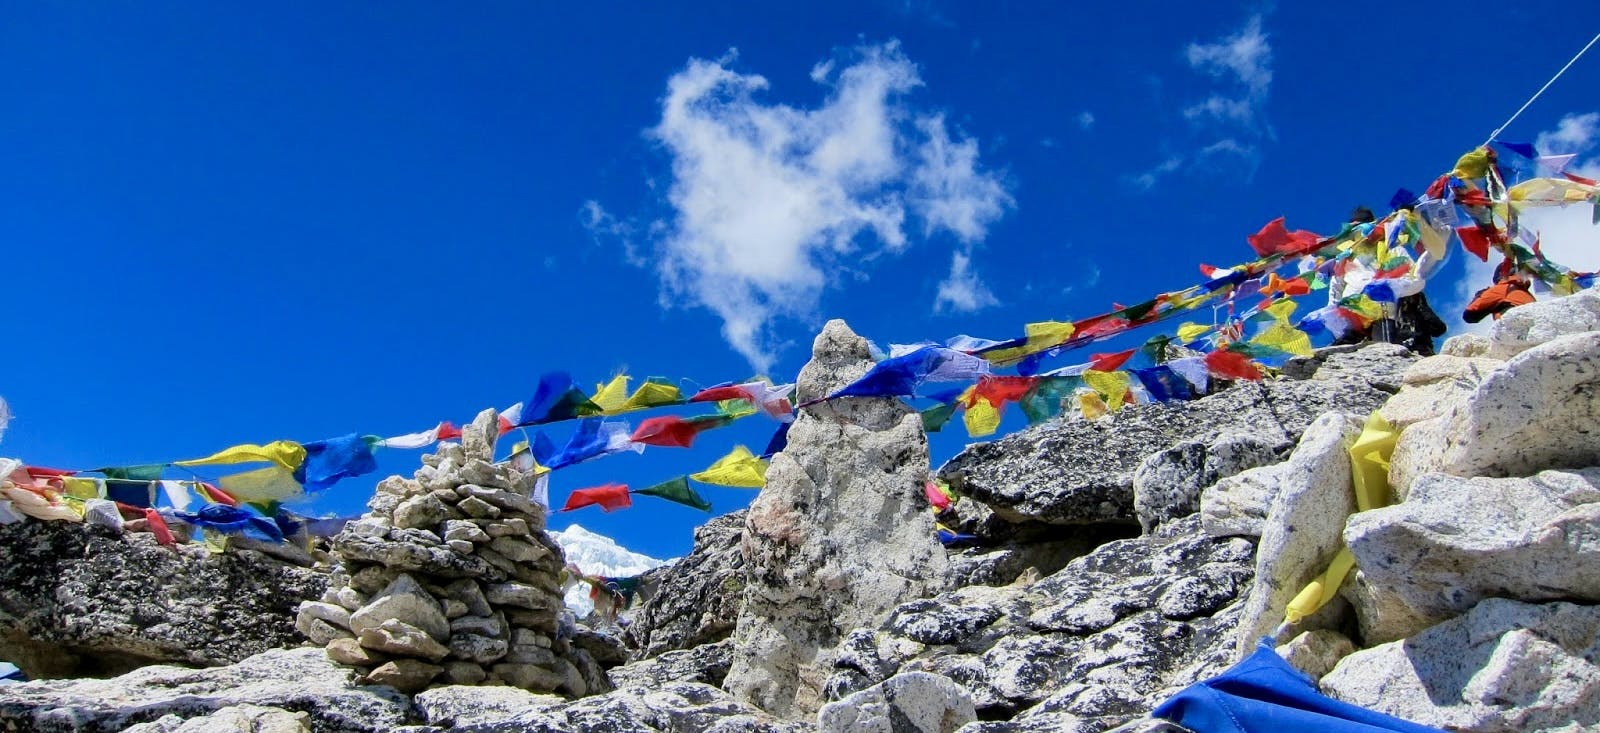 What is the itinerary for the Everest Base Camp Trek?